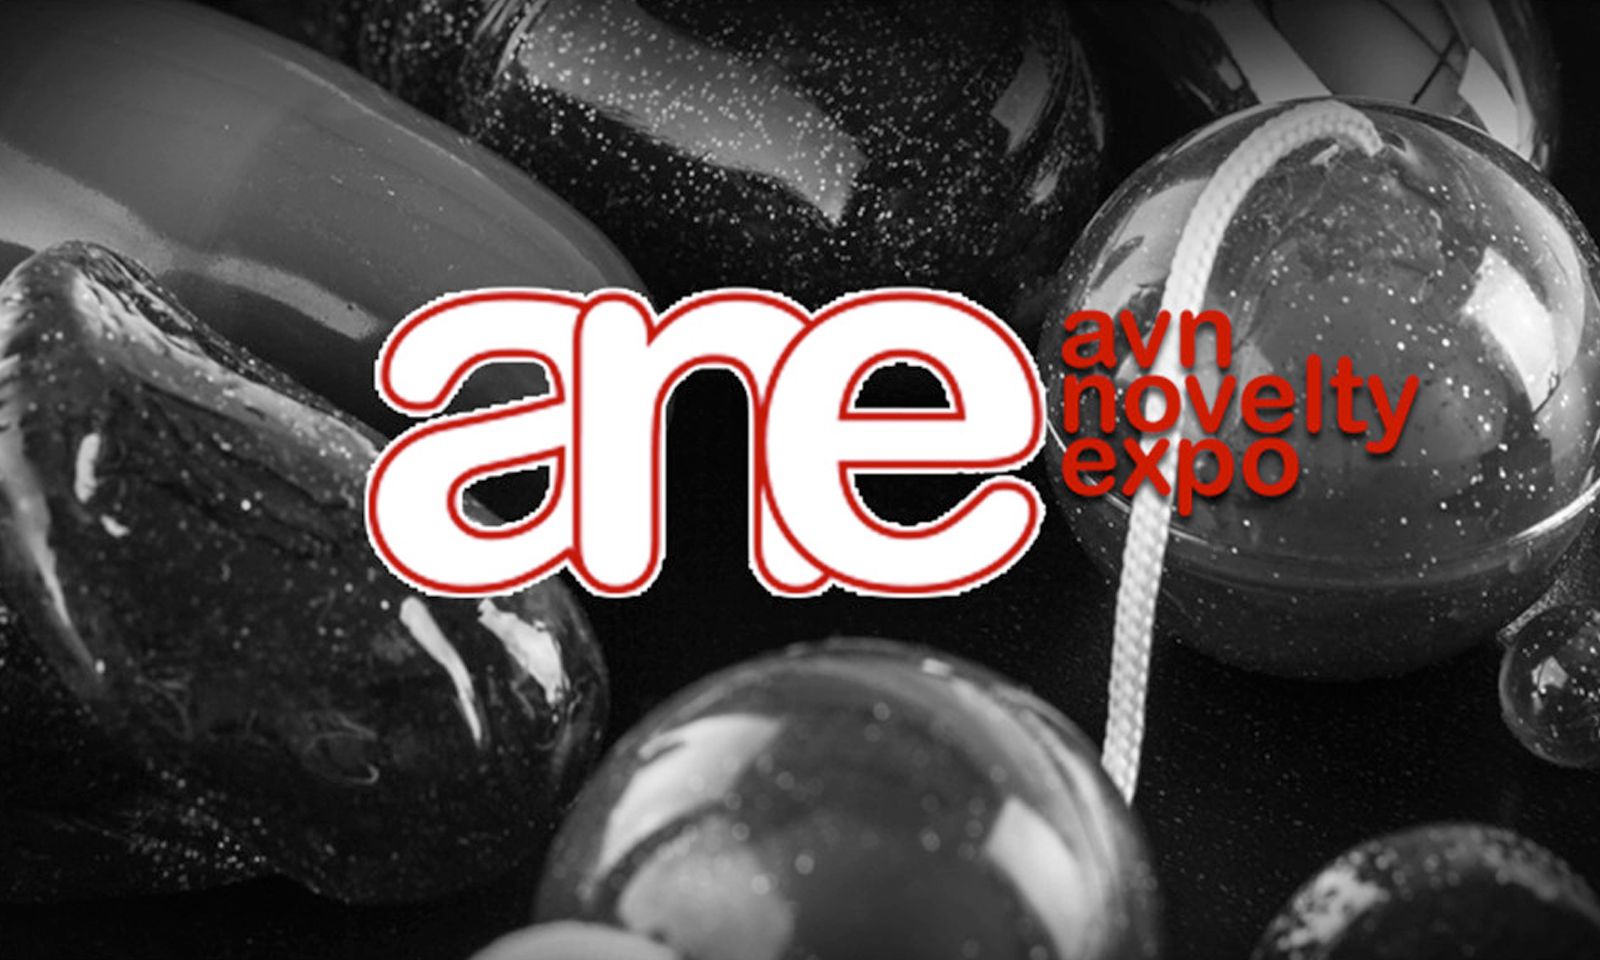 Exclusive Media Event Returning to AVN Novelty Expo